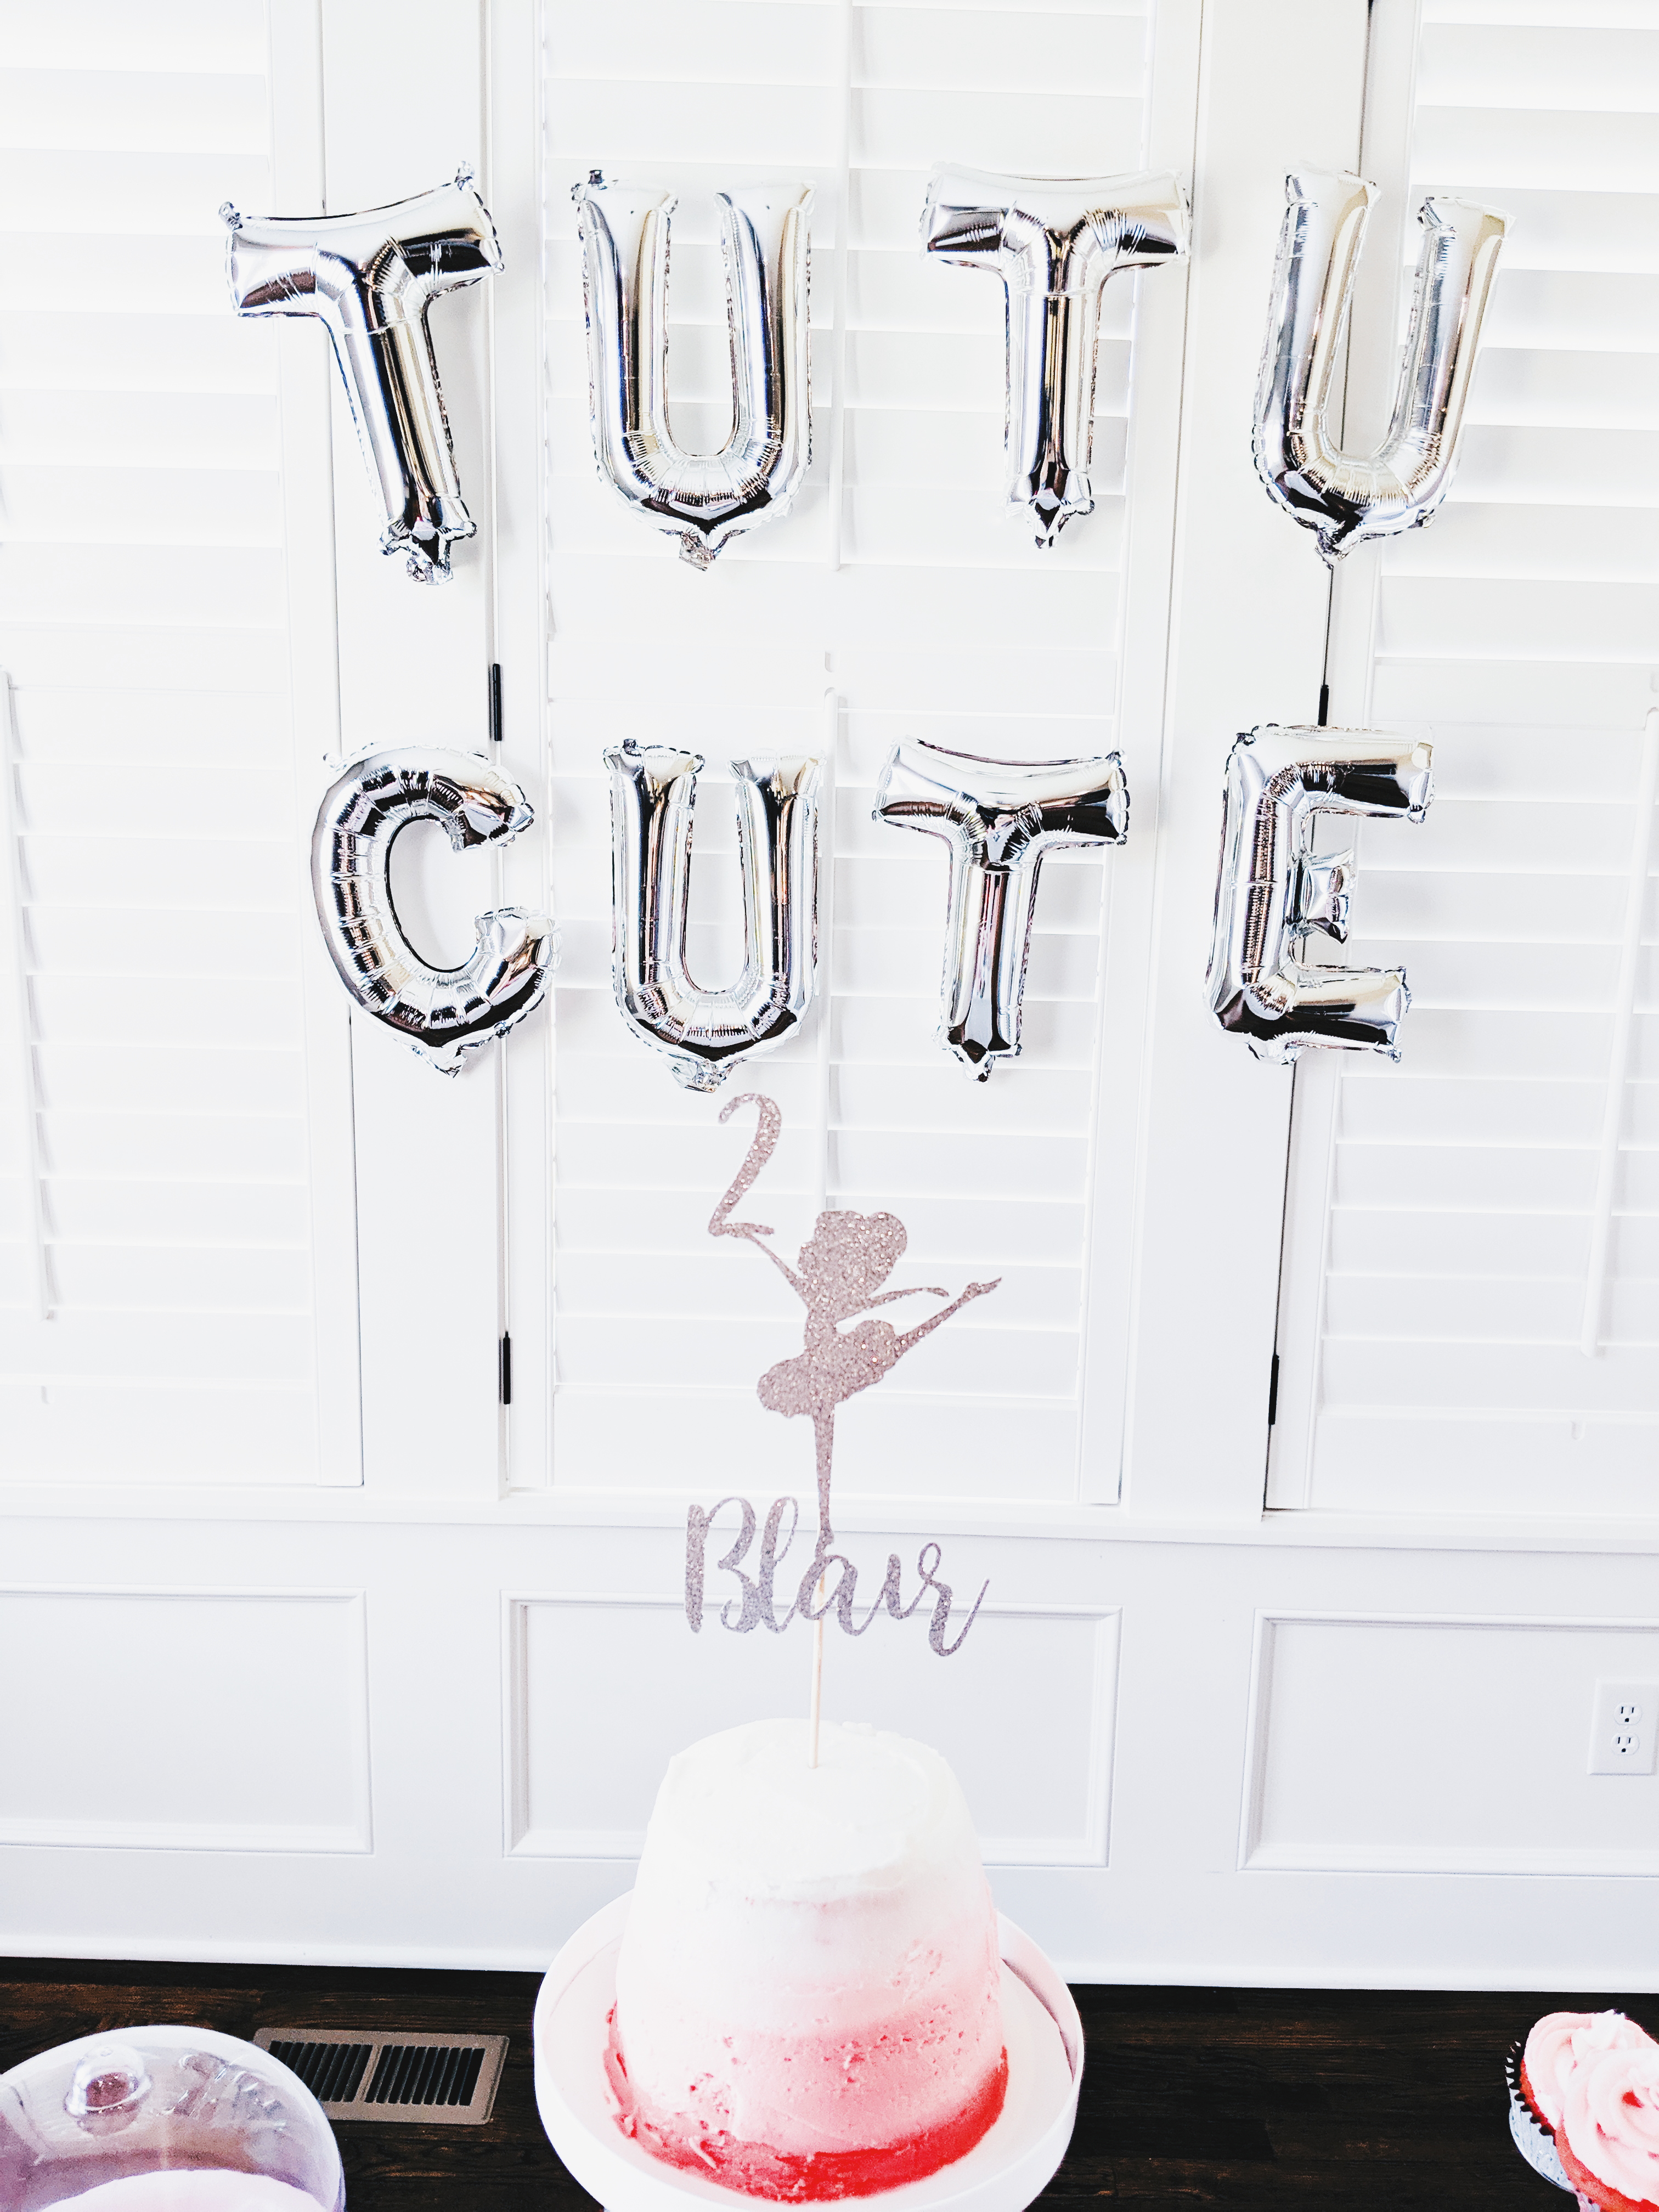 Tutu Cute Birthday Party - 2nd Birthday Party Ideas • COVET by tricia